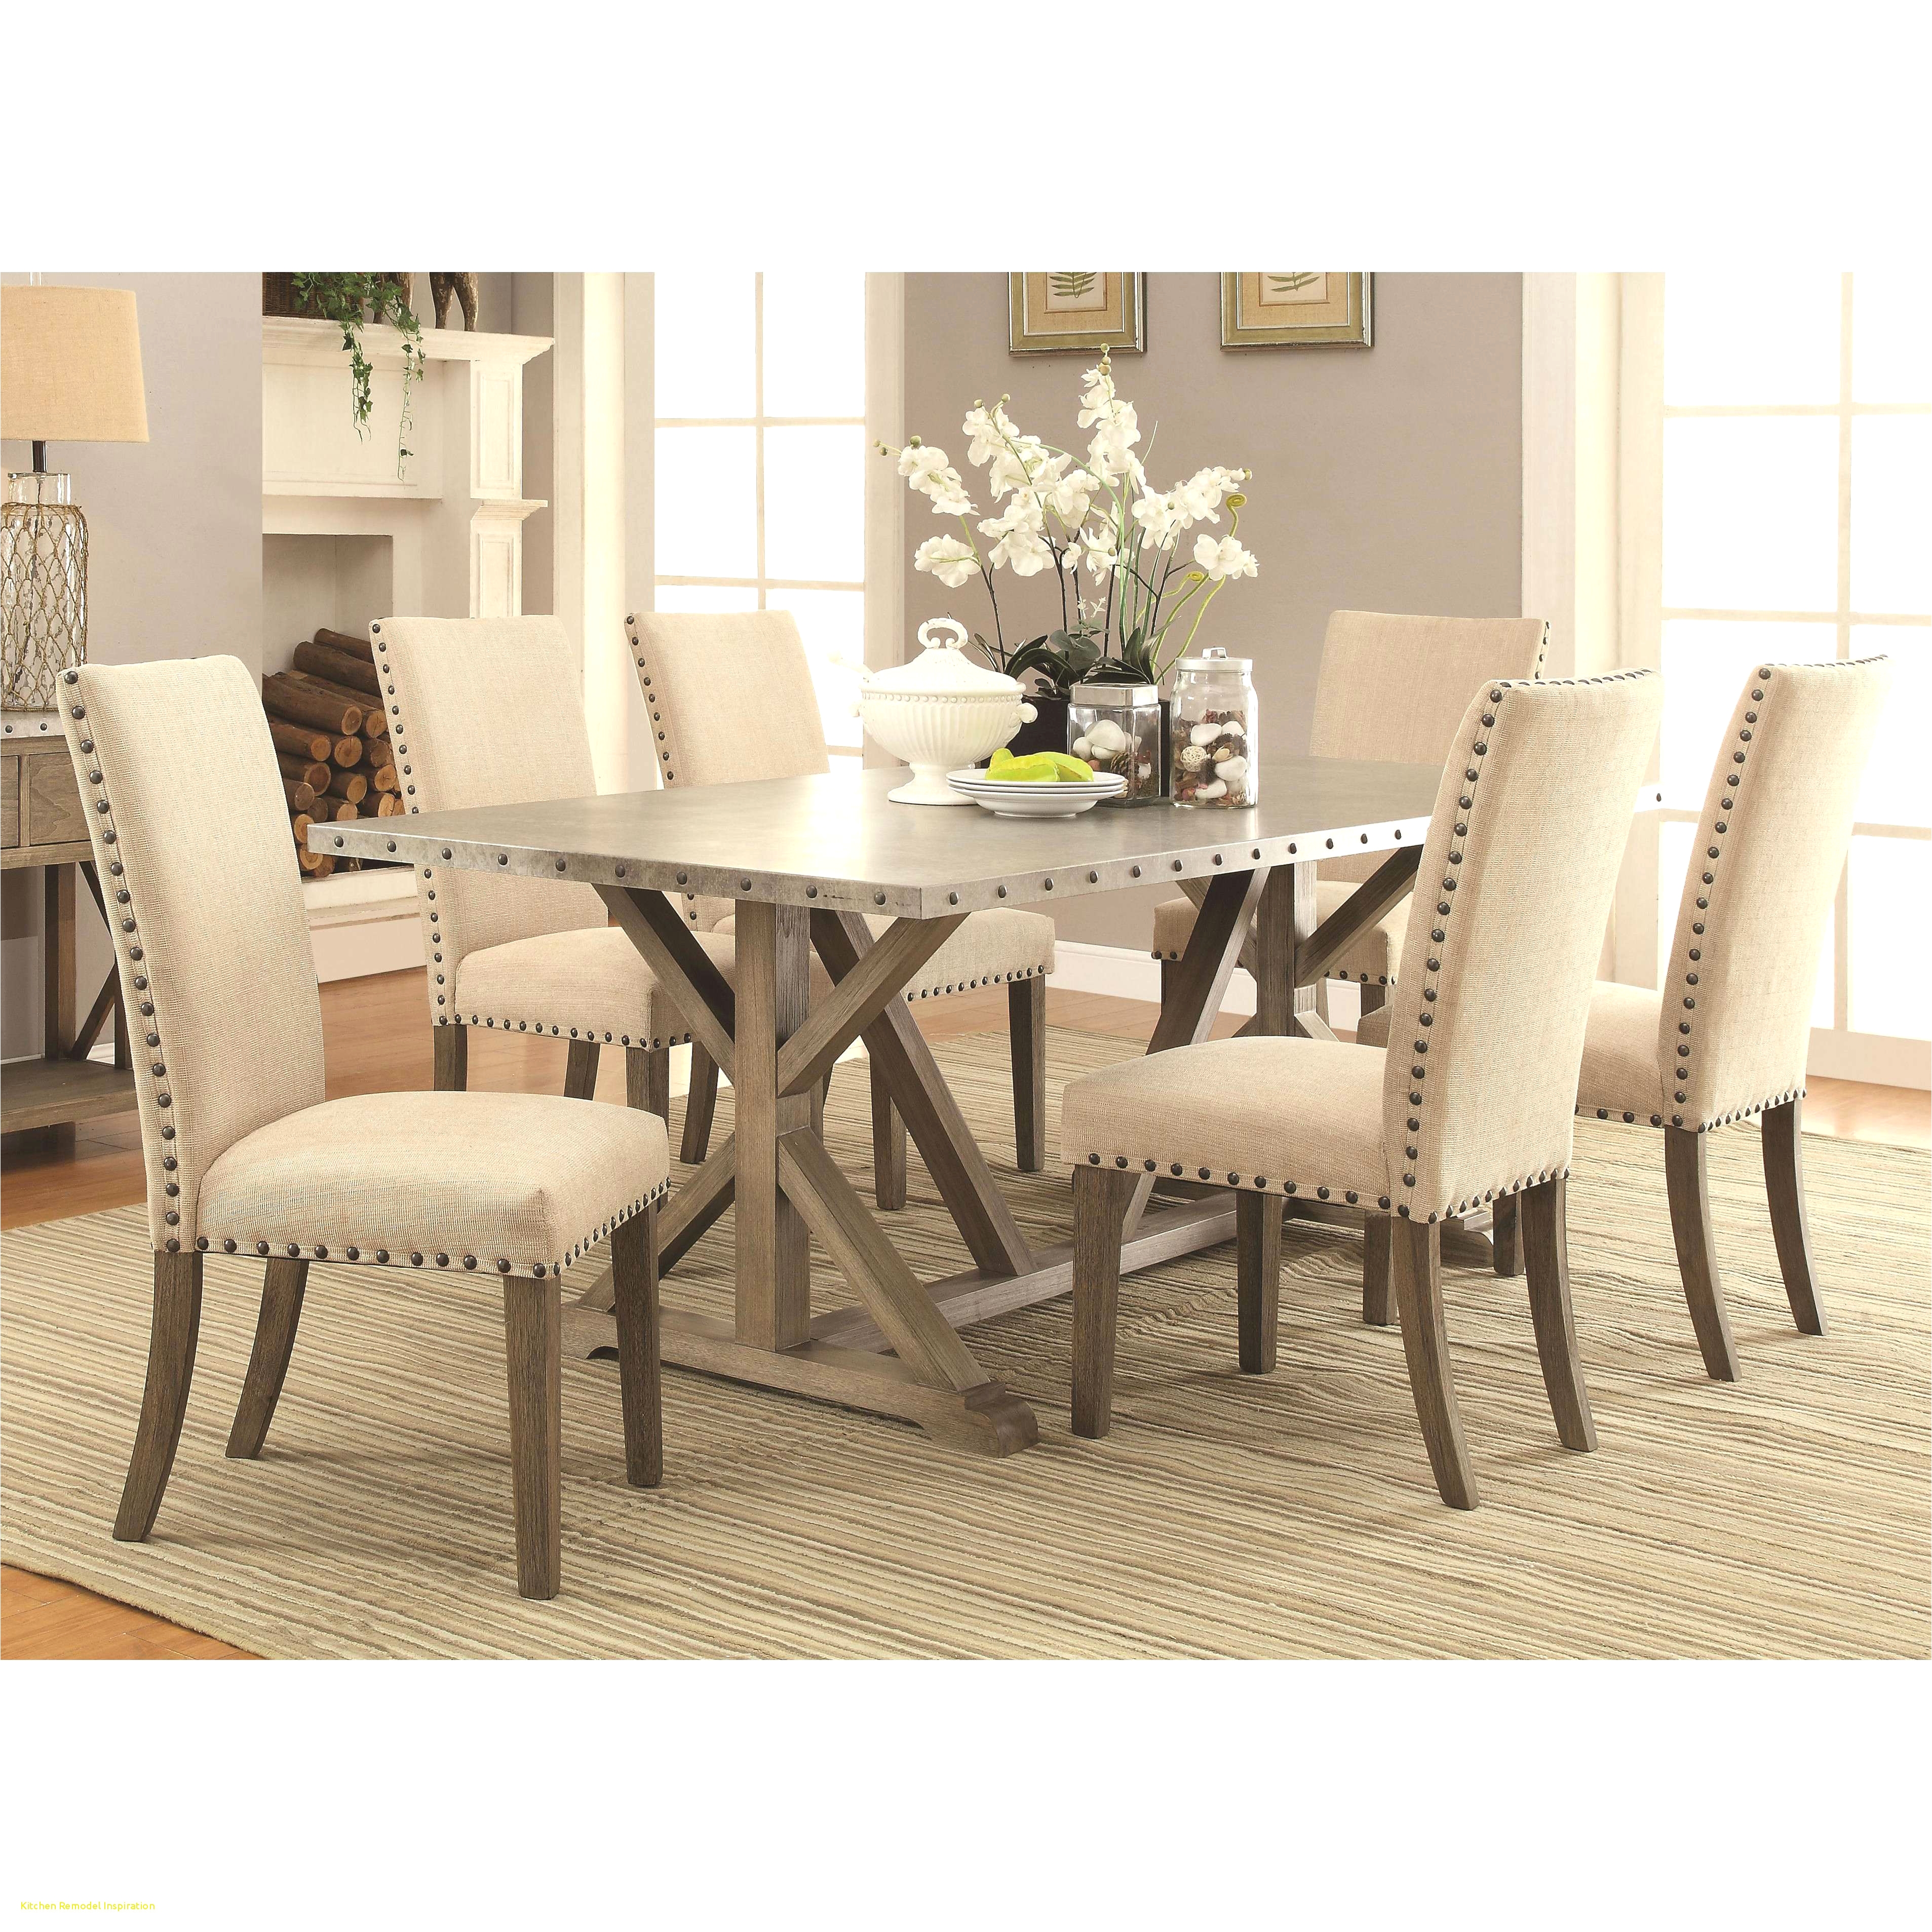 Small Glass Dining Room Table top Result Glass Dining Room Table Set Luxury Living Room Center